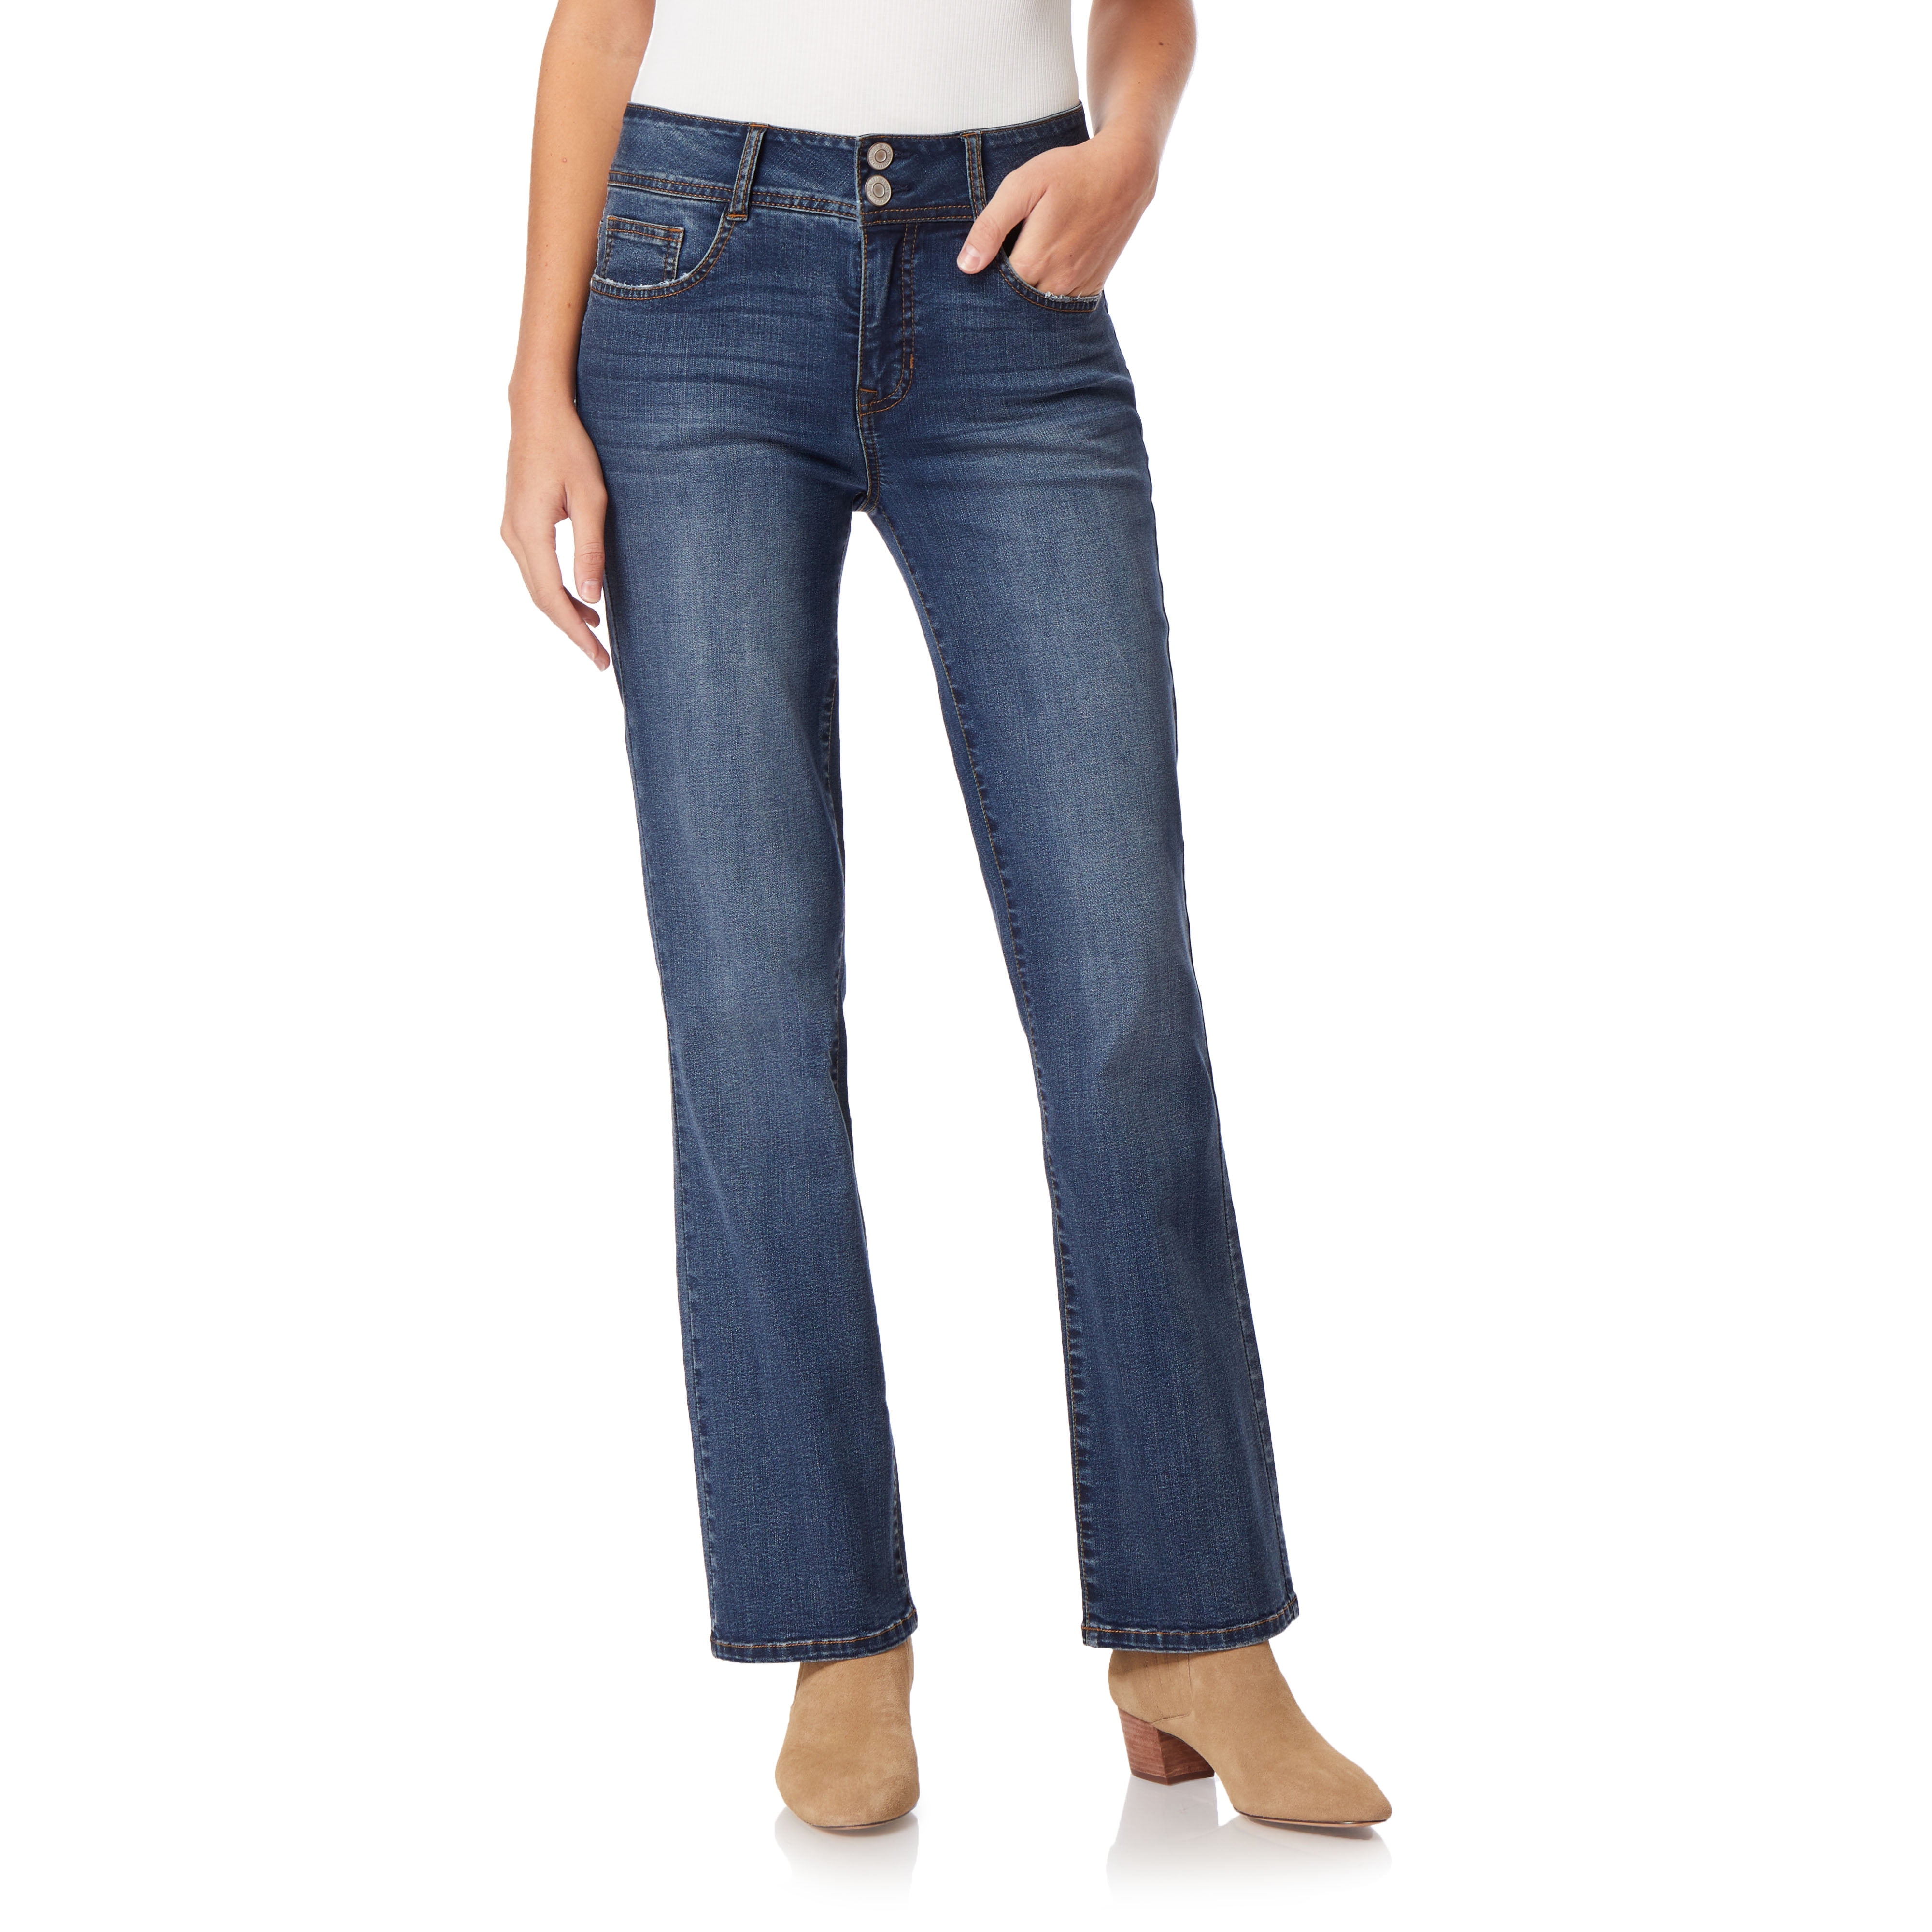 Angels Forever Young Women's Curvy Bootcut Jeans - Walmart.com